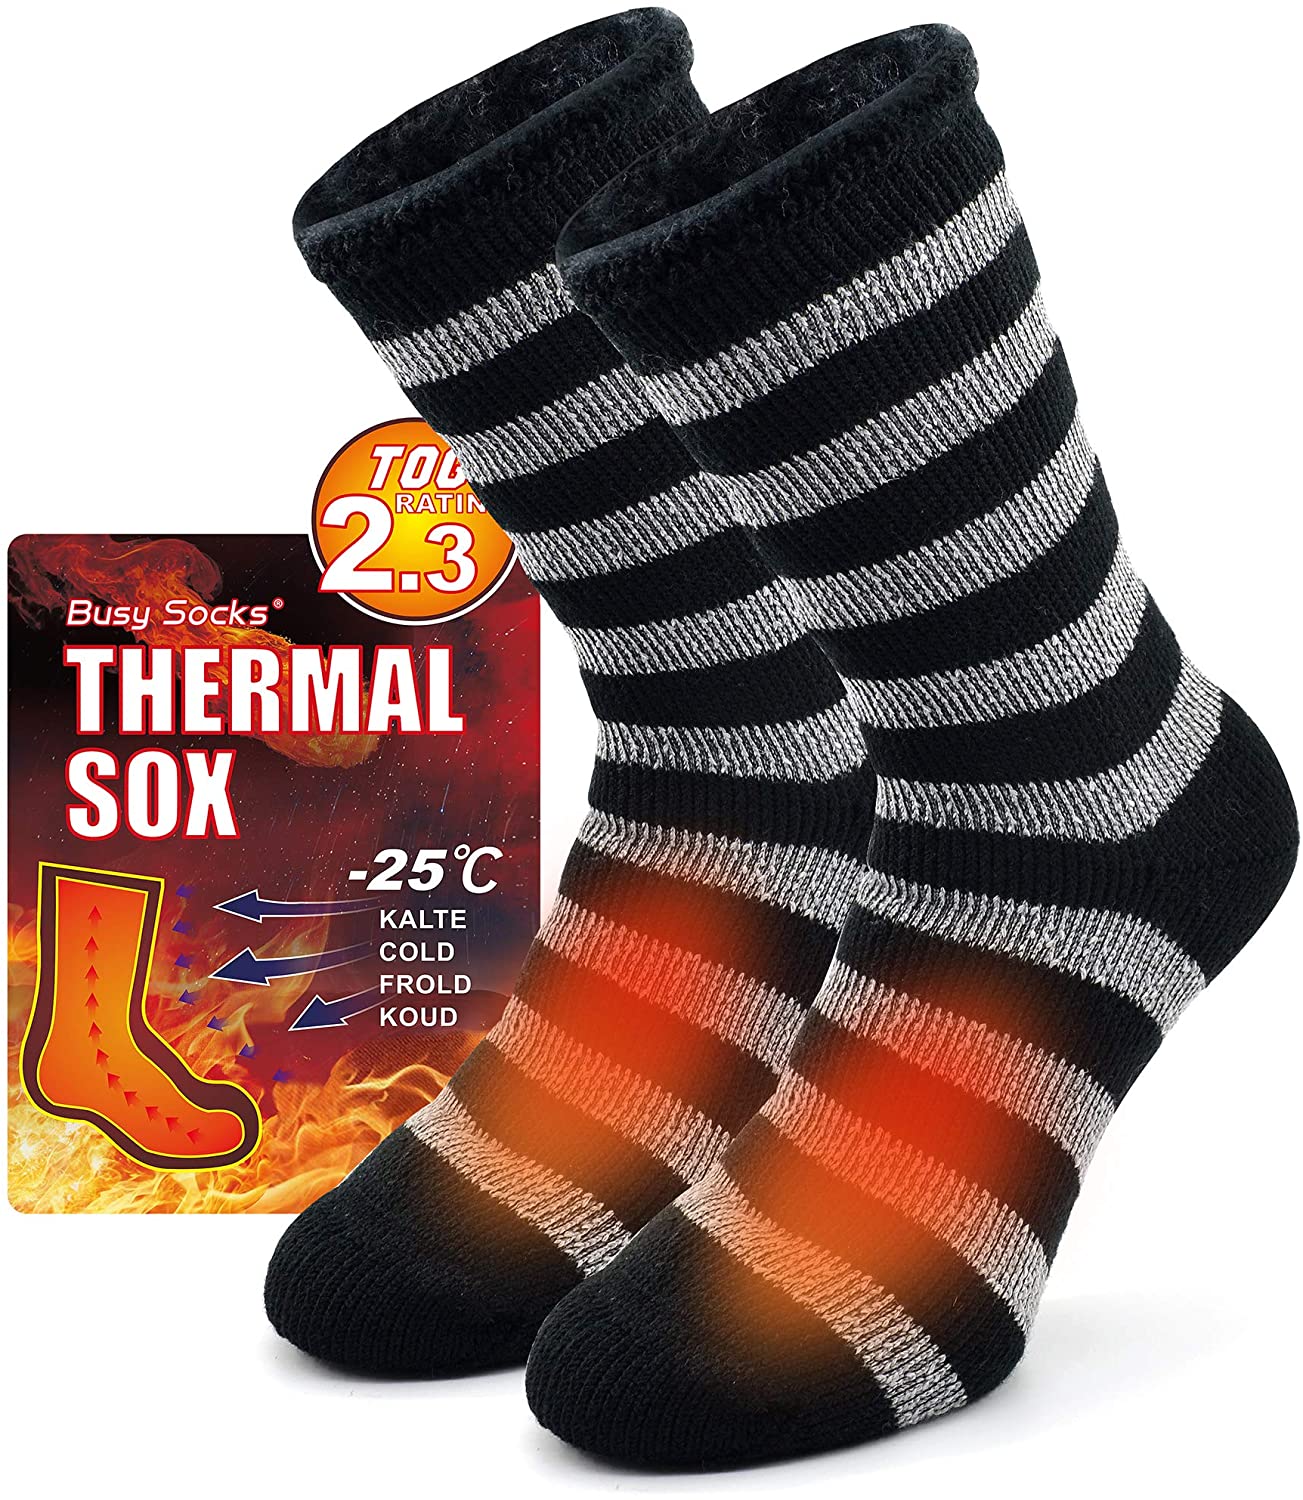 Winter Warm Thermal Socks for Men Women, Busy Socks Extra Thick Insulated  Boot H